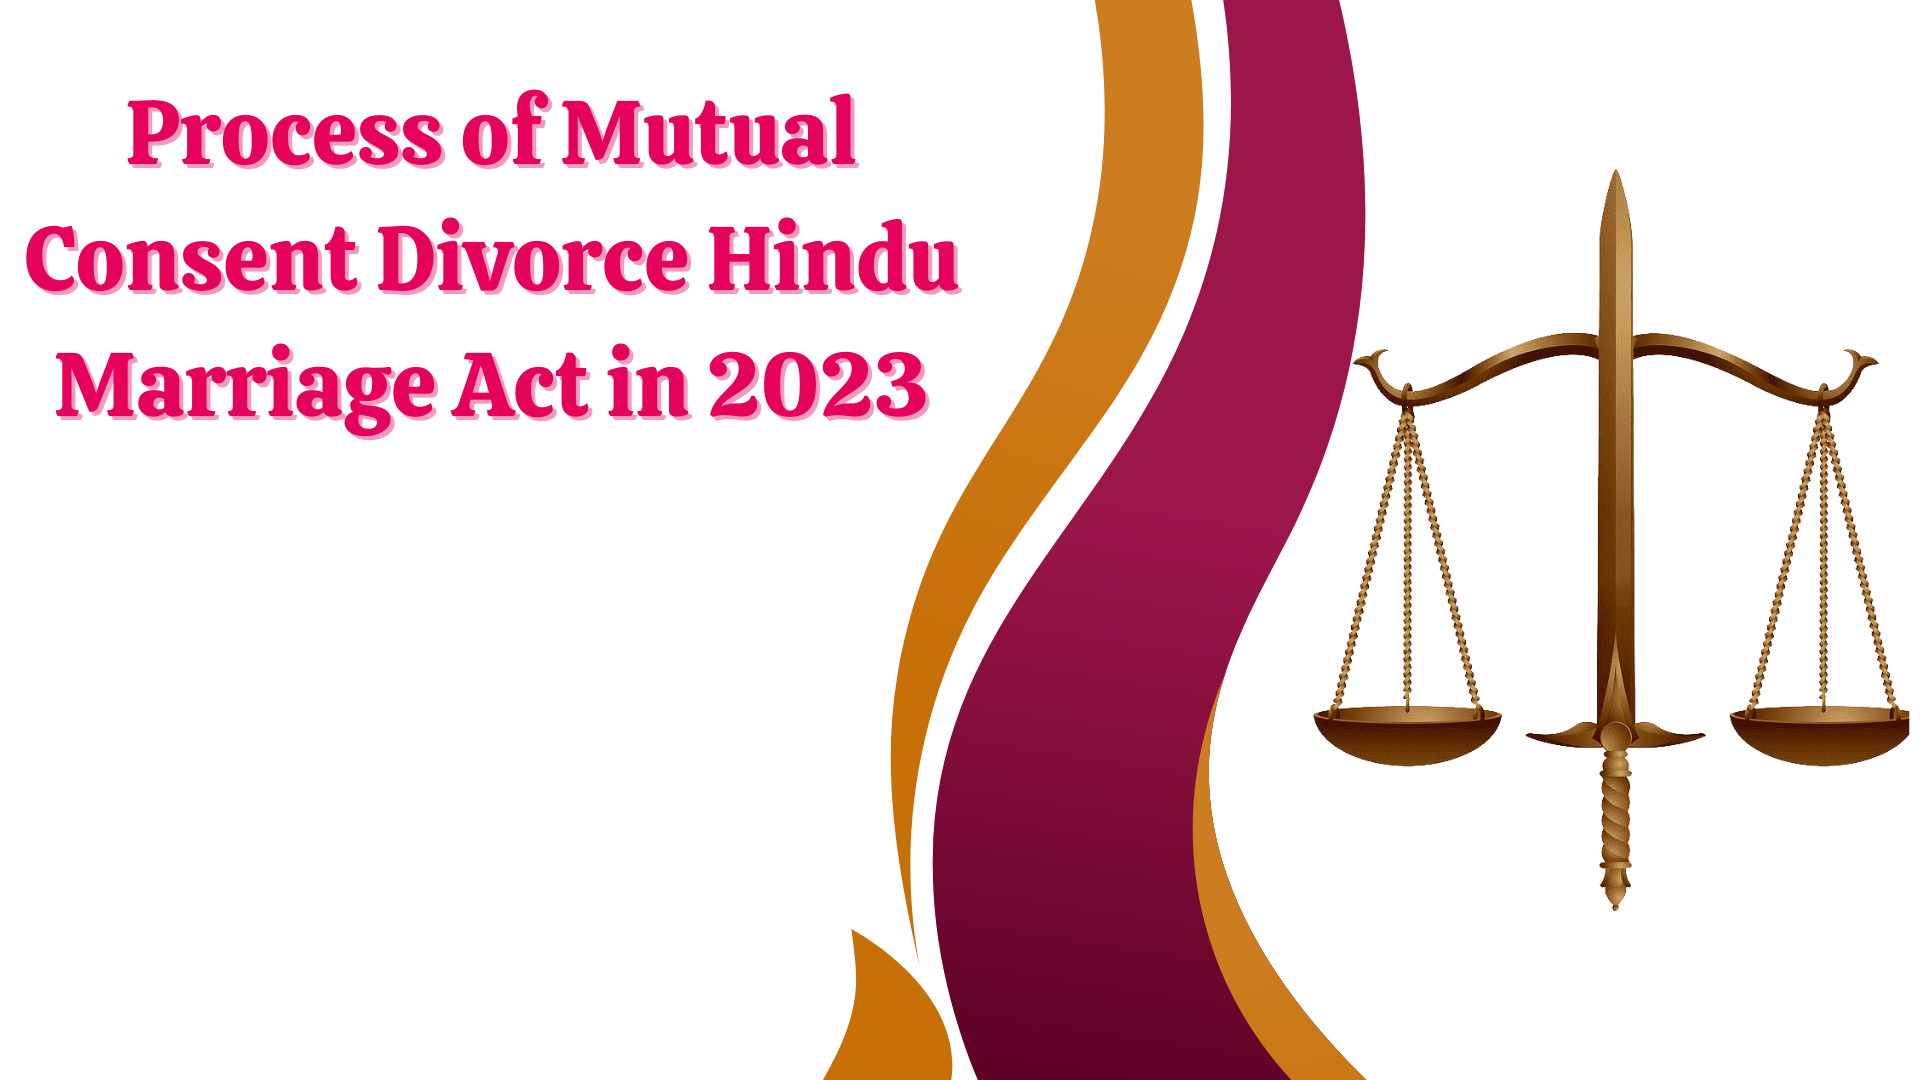 Process of Mutual Consent Divorce Hindu Marriage Act in 2023